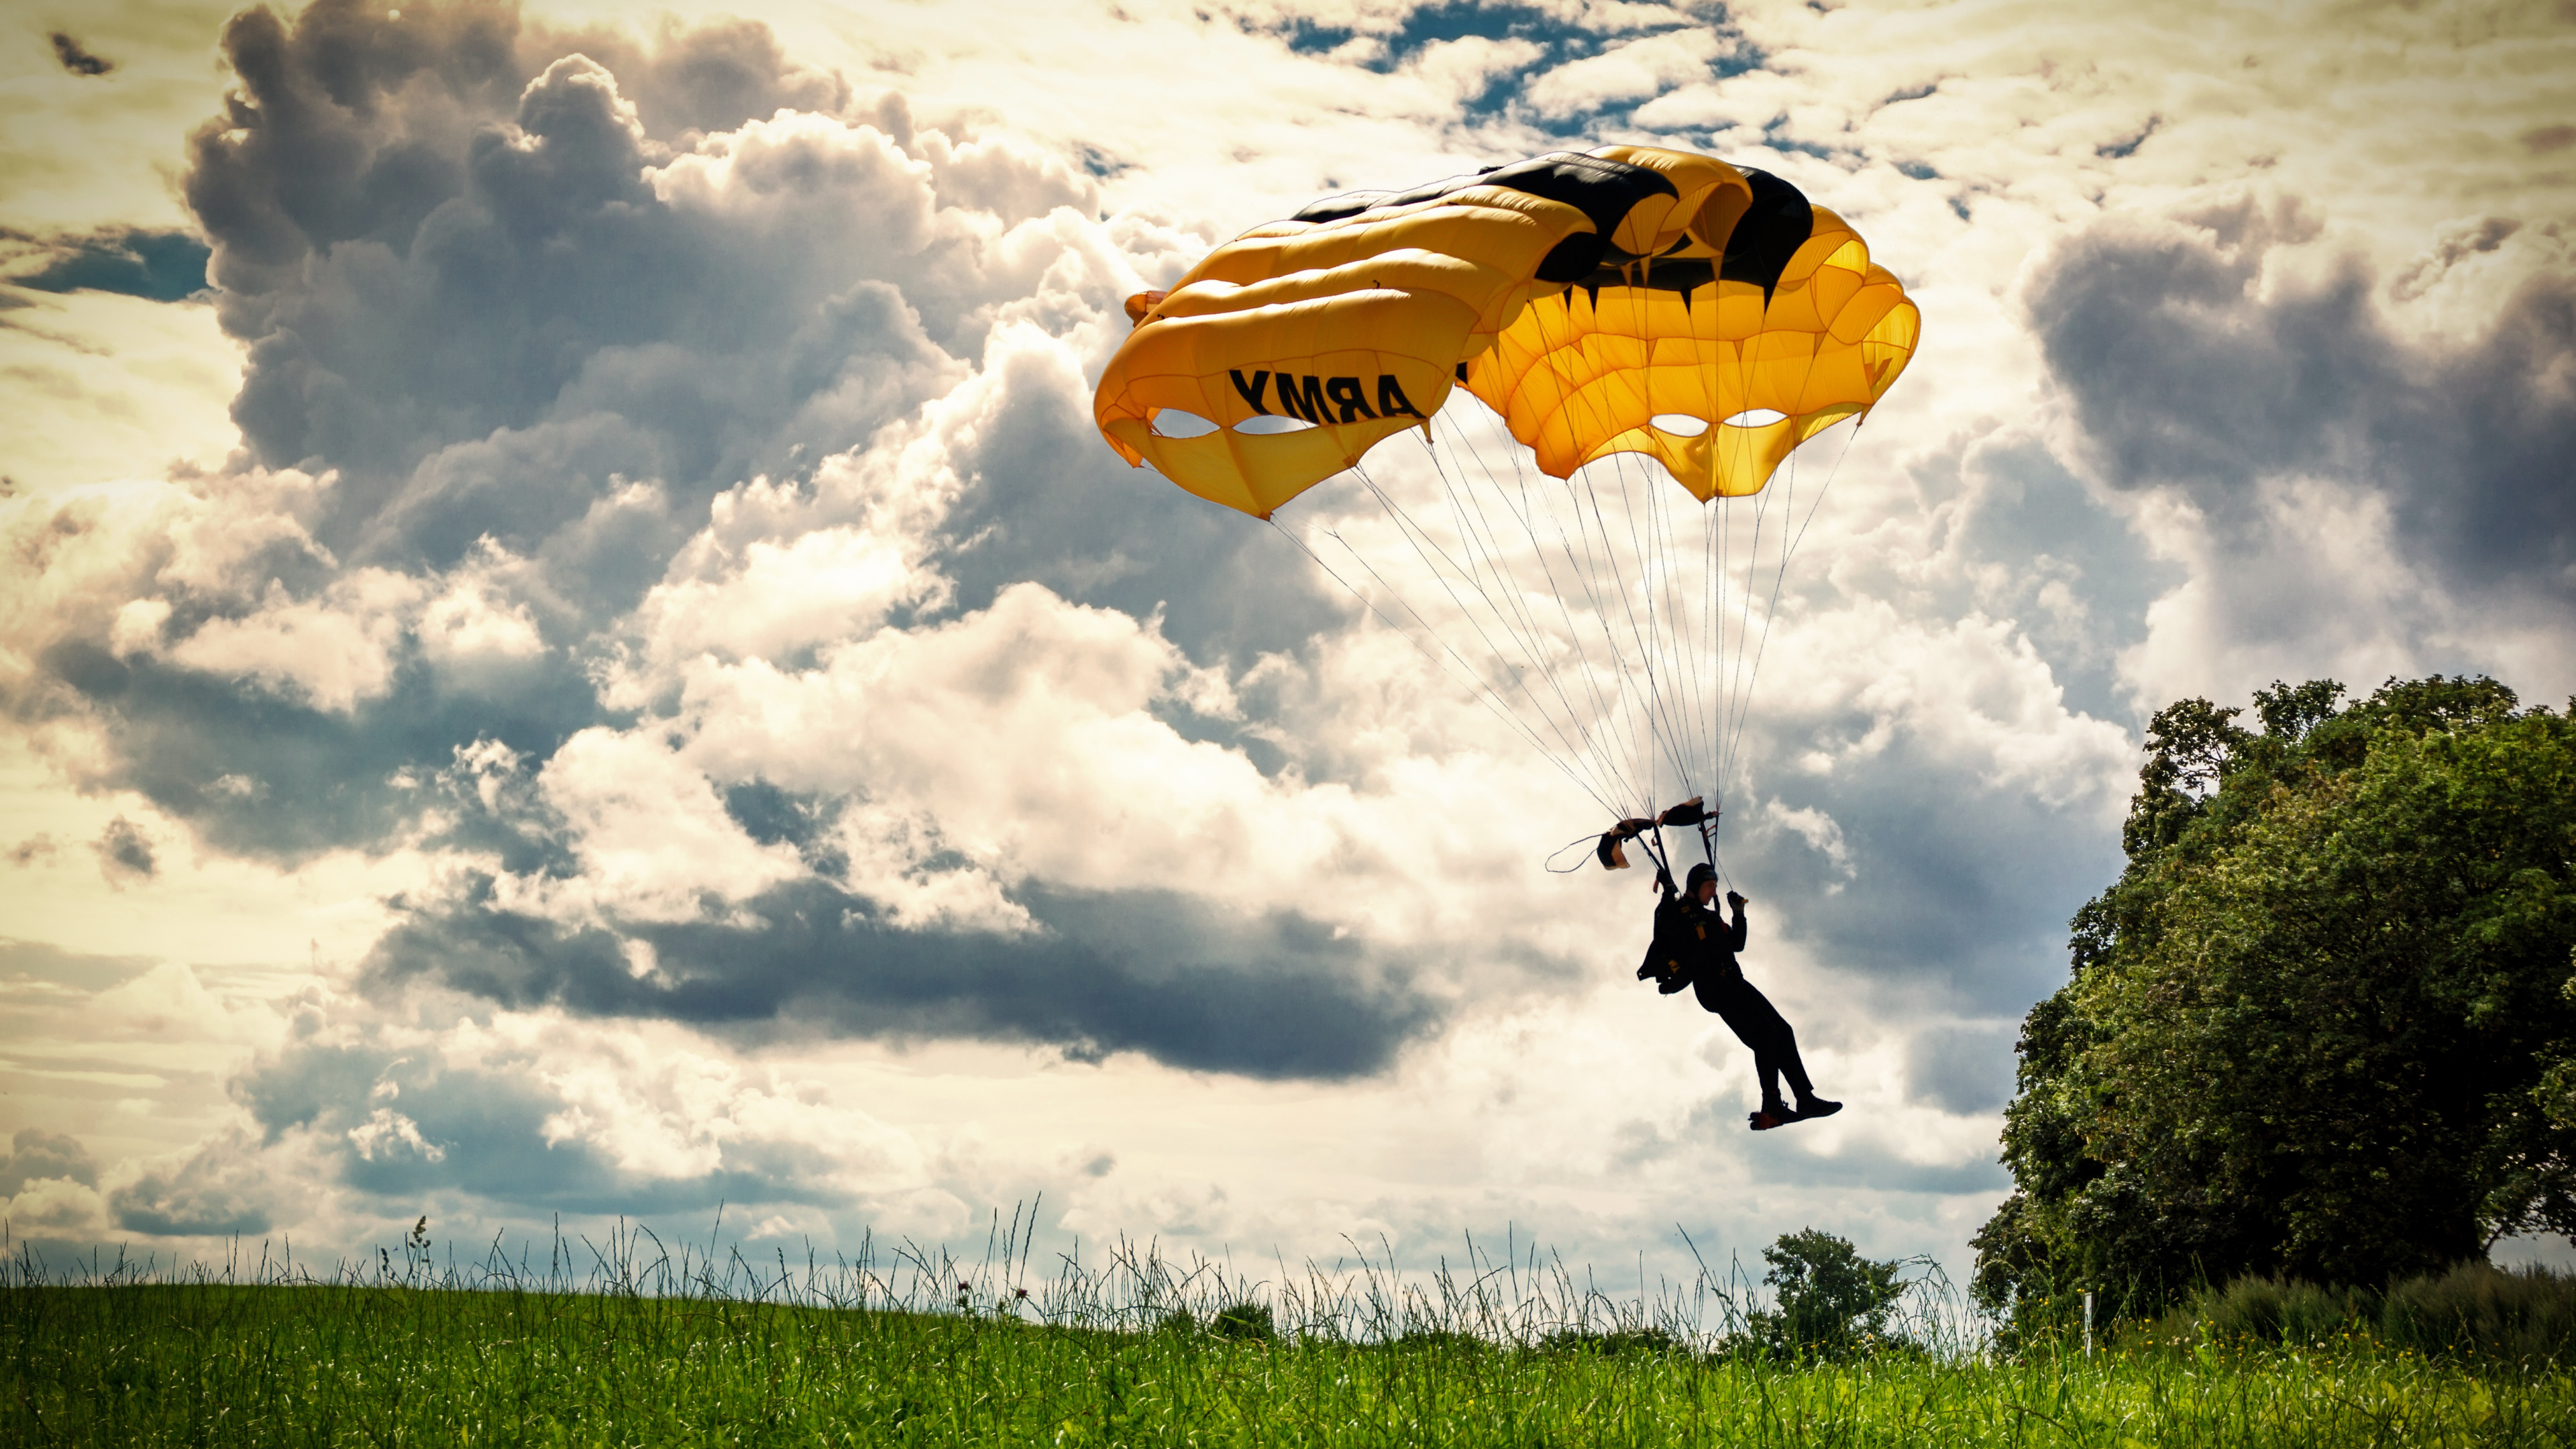 Person in Black Jacket and Pants Riding Yellow Parachute Under White Clouds During Daytime. Wallpaper in 3840x2160 Resolution